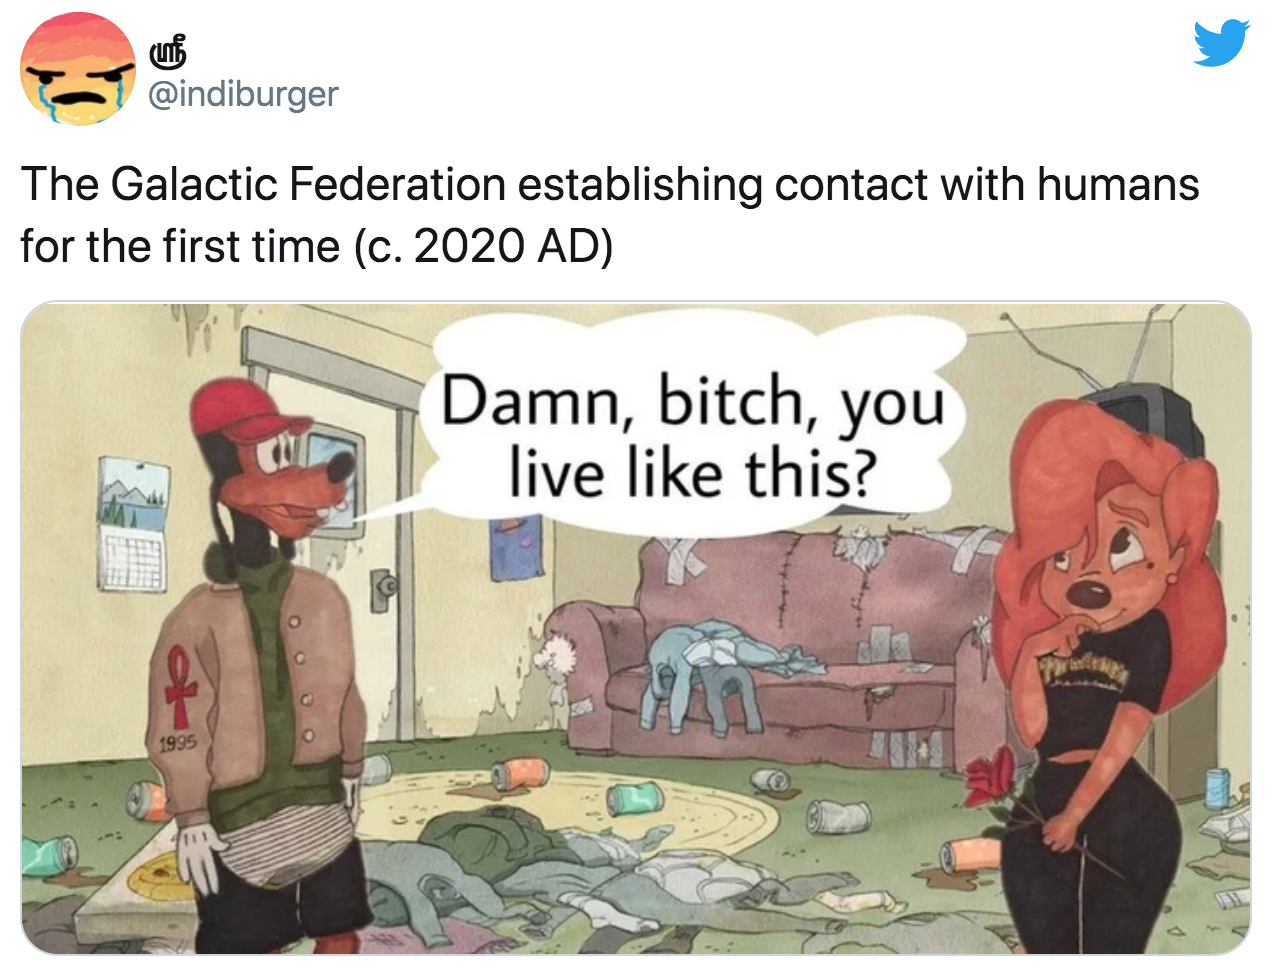 Internet meme - The Galactic Federation establishing contact with humans for the first time c. 2020 Ad Damn, bitch, you live this? G